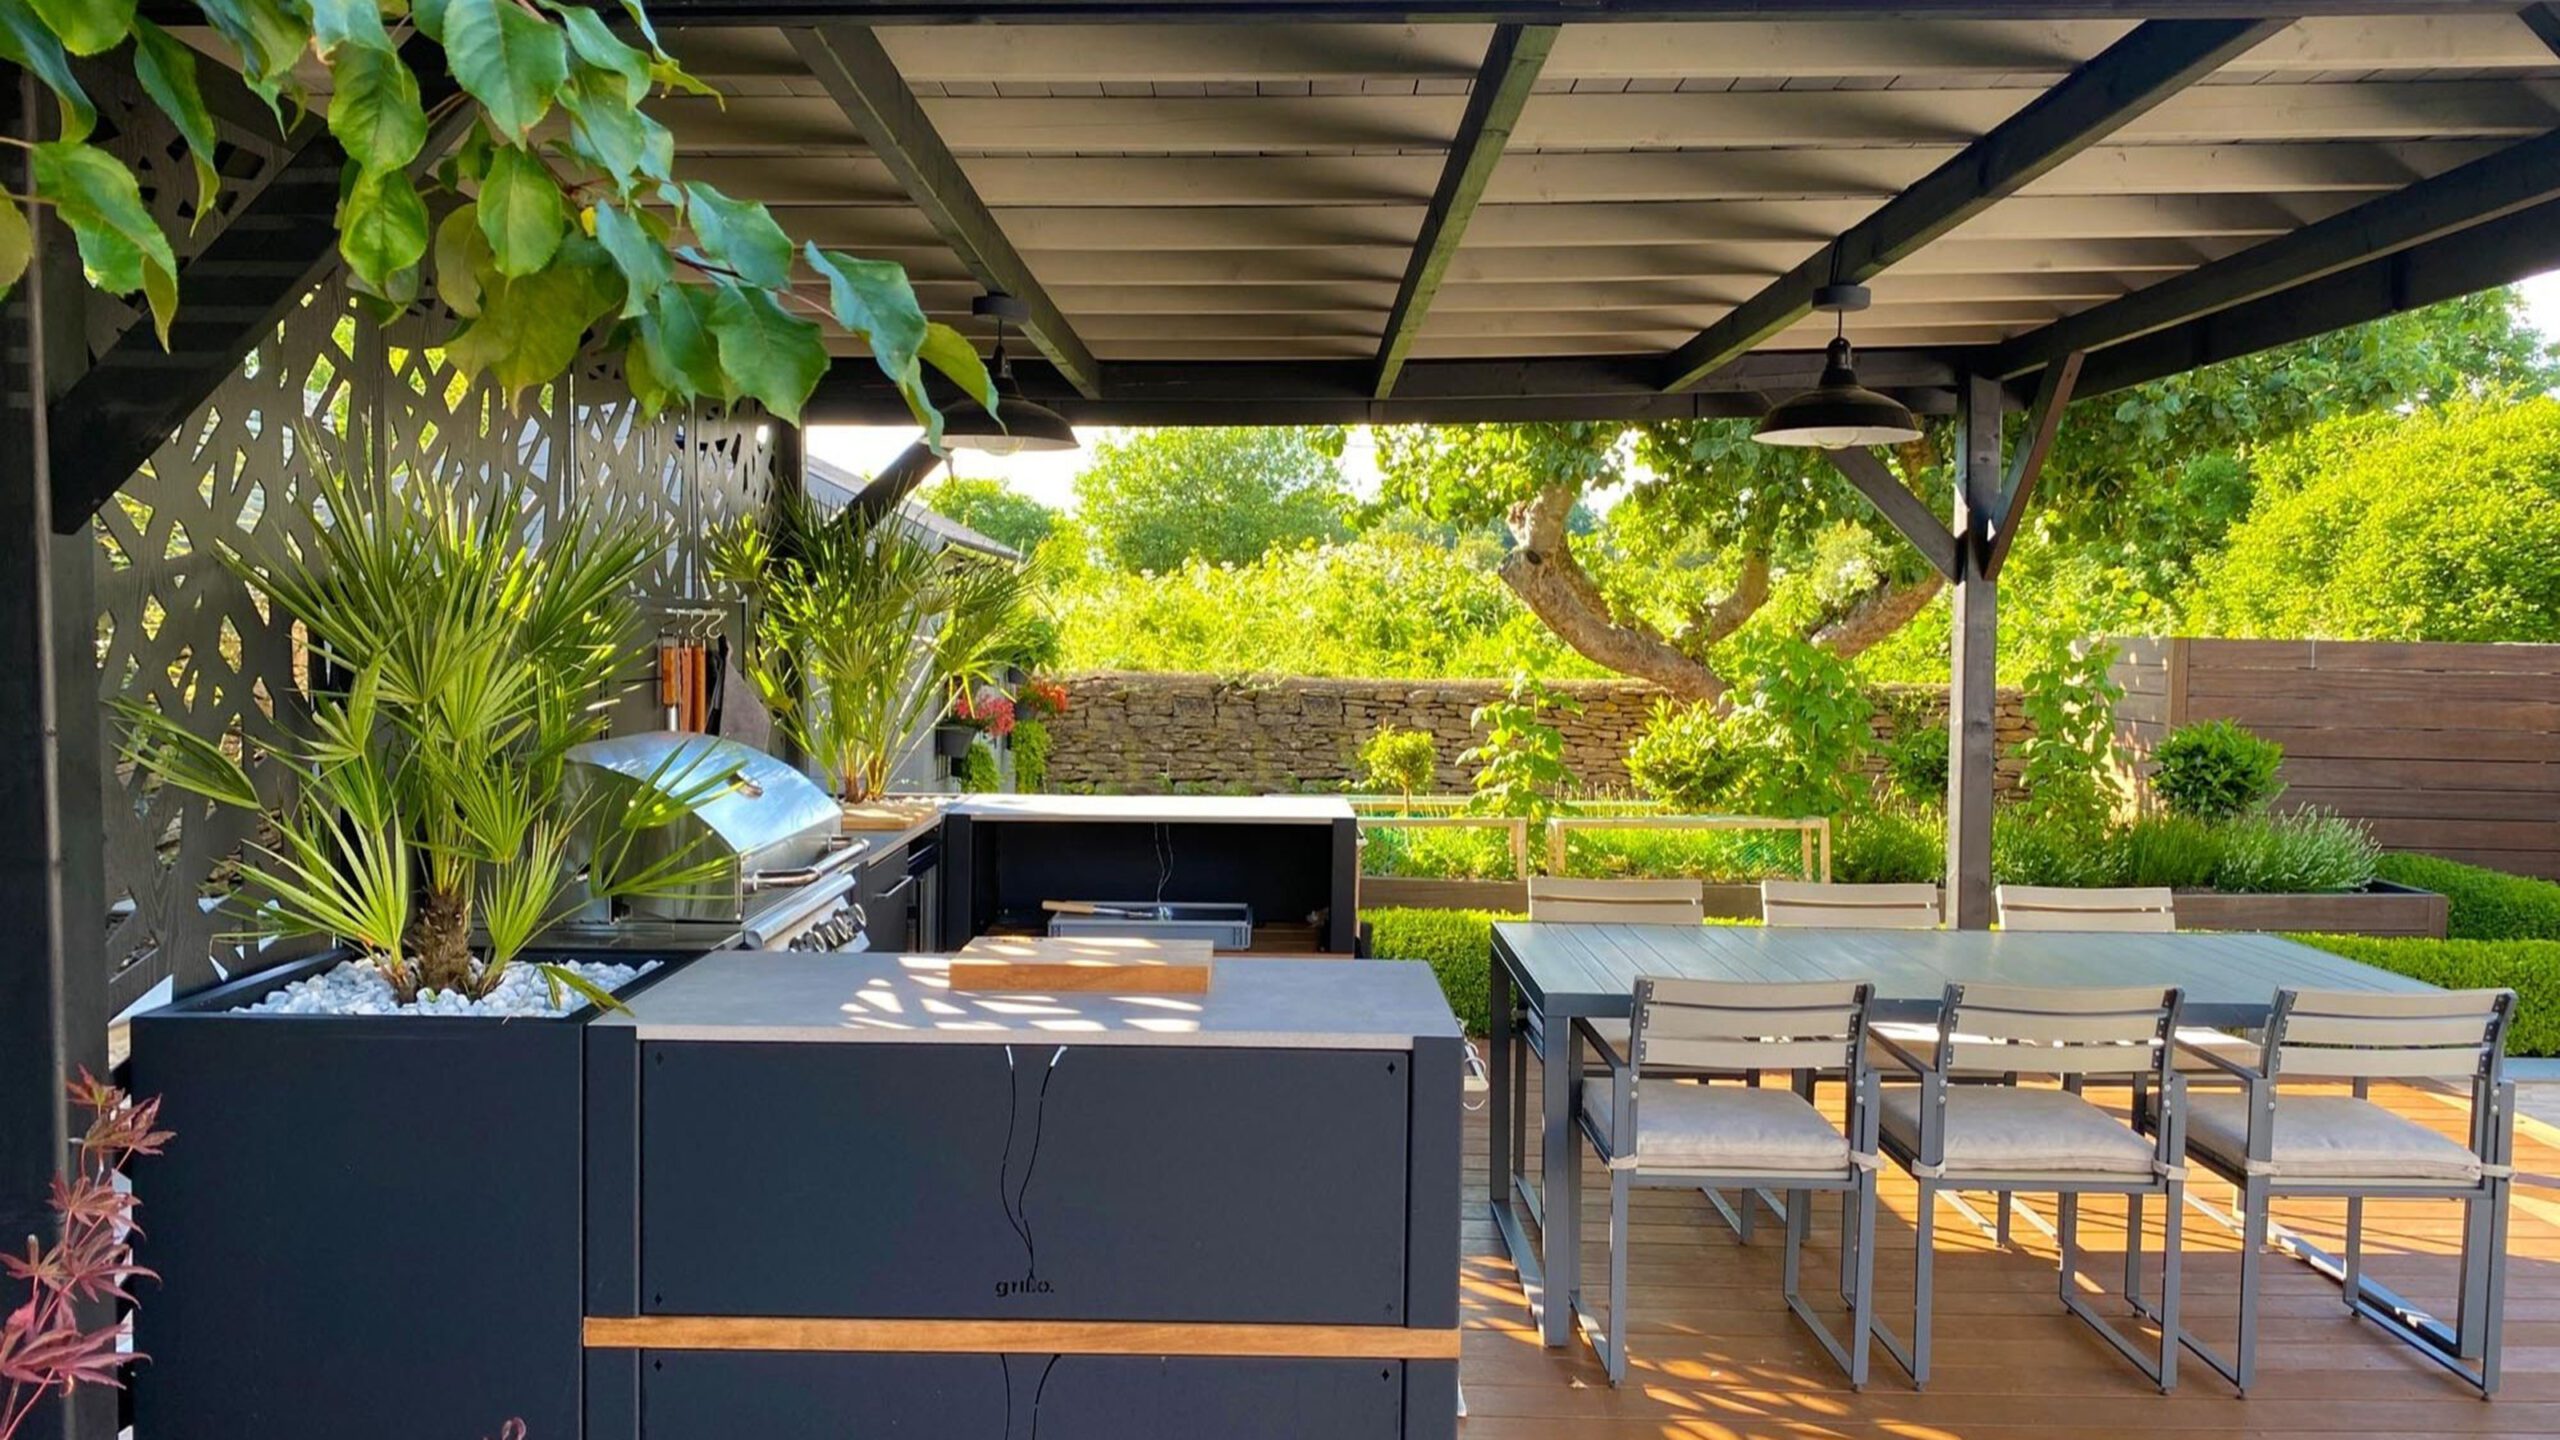 Can You Grill Under a Covered Patio?